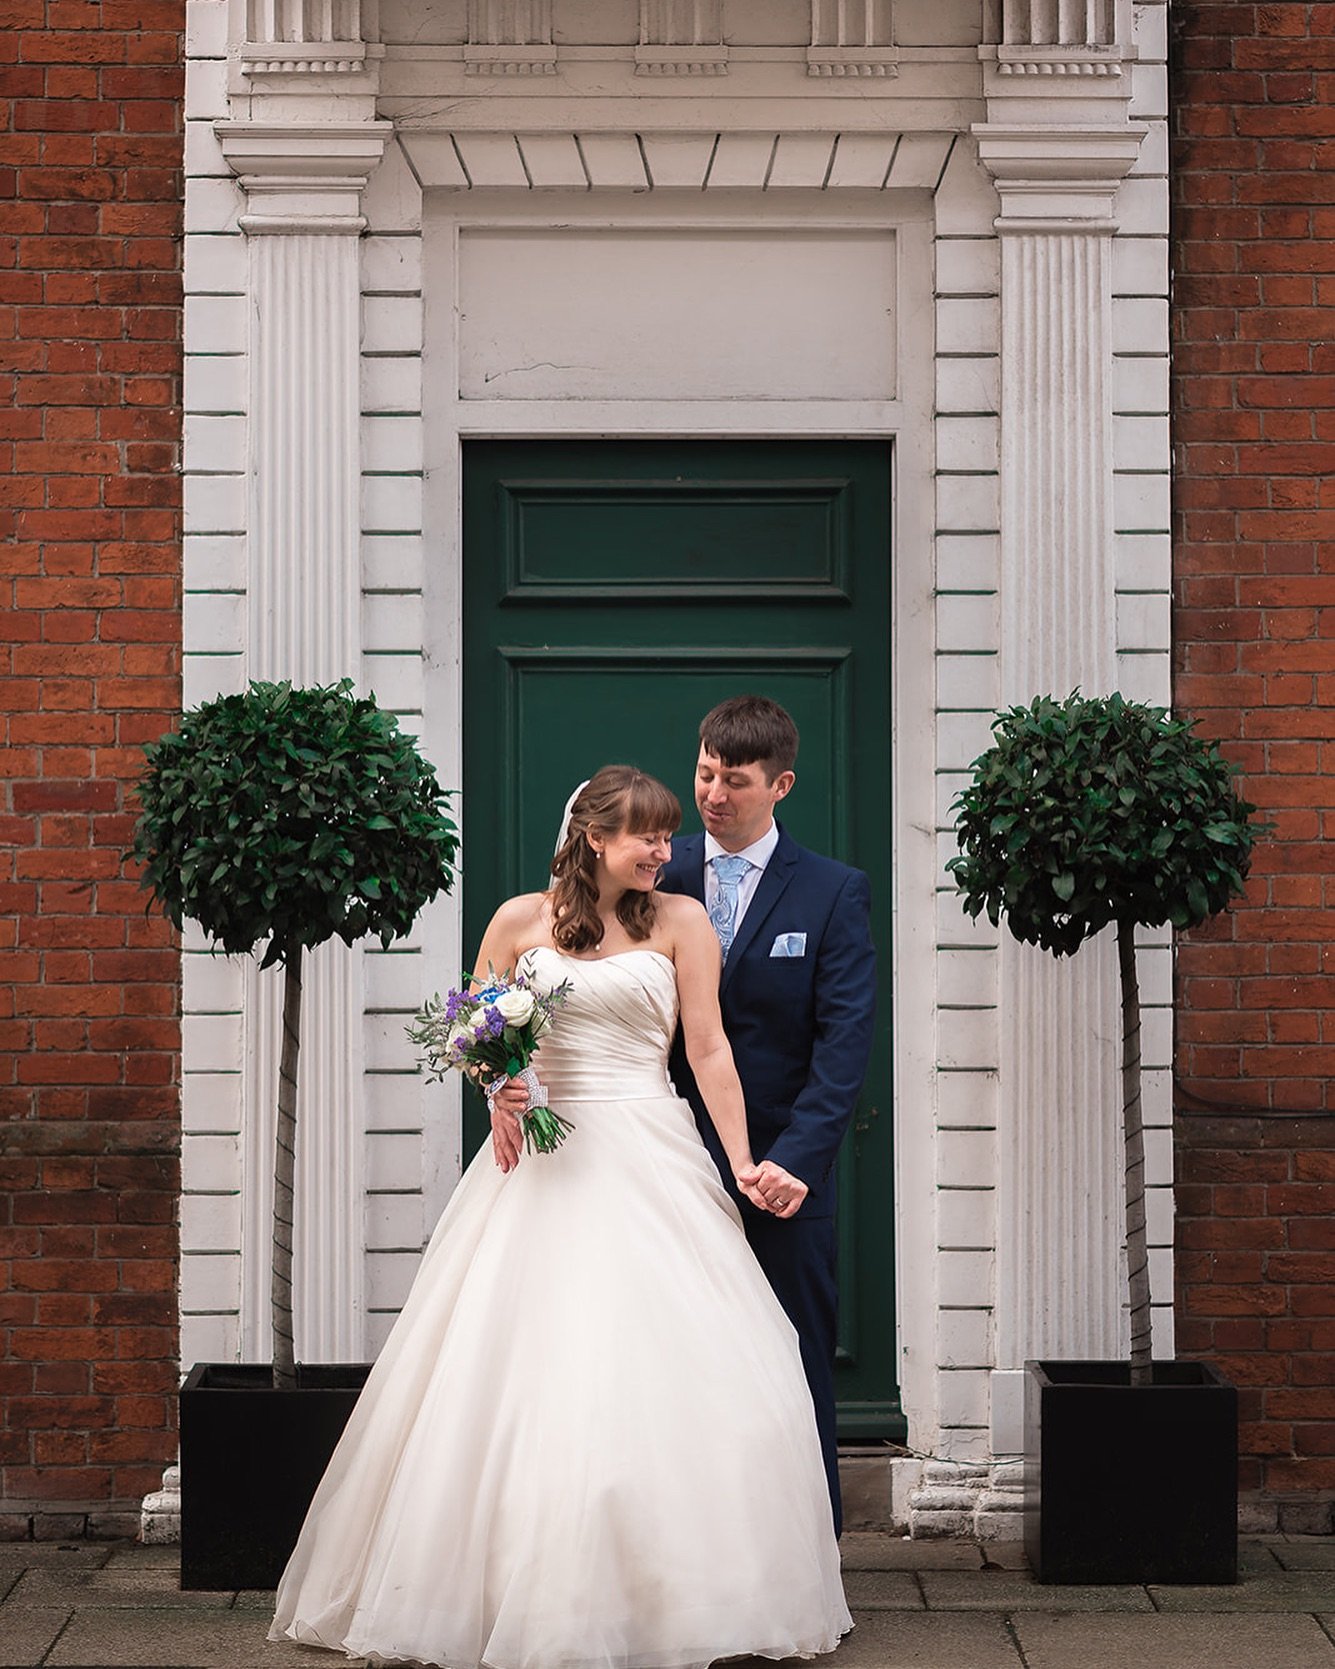 💍 Happily Ever After at Winchester Registry Office and Hotel Du Vin! 💒✨
⠀⠀⠀⠀⠀⠀⠀⠀
⠀⠀⠀⠀⠀⠀⠀⠀⠀
Felicity looked absolutely stunning in her exquisite white dress, radiating elegance and joy with every step down the aisle. 
⠀⠀⠀⠀⠀⠀⠀⠀⠀
Surrounded by their c